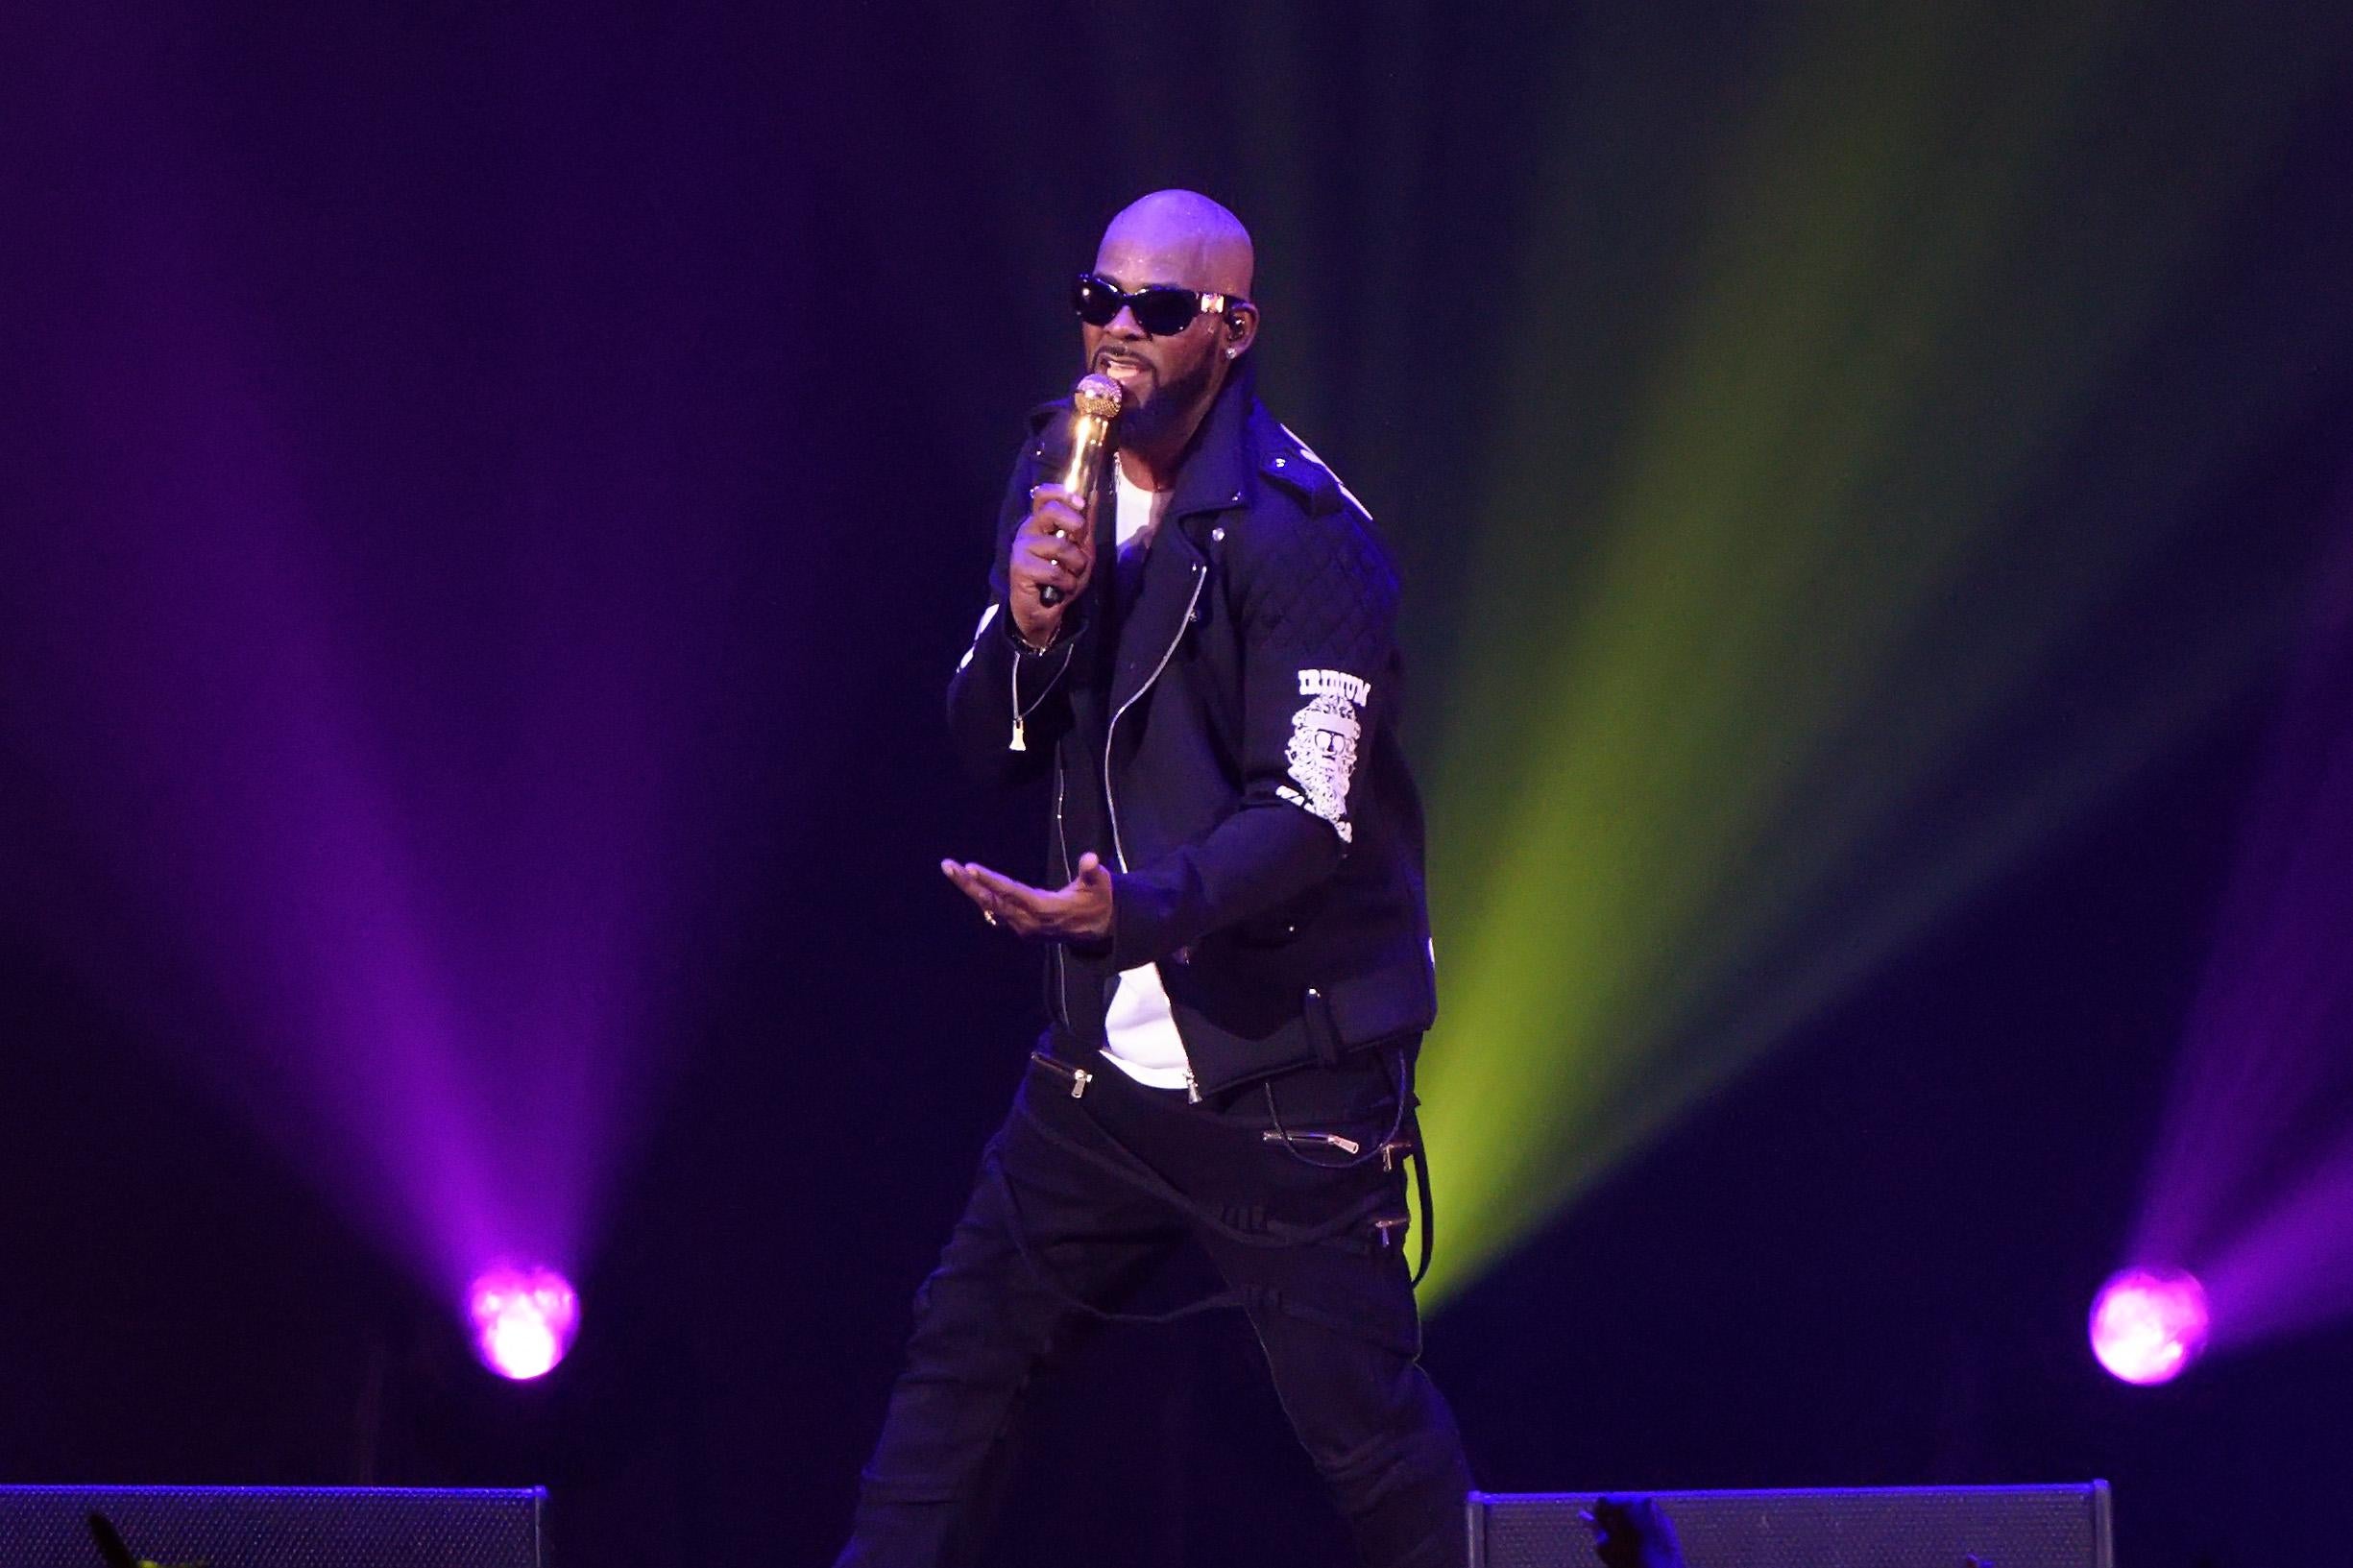 R. Kelly performs during The Buffet Tour at Allstate Arena on May 7, 2016 in Chicago, Illinois.